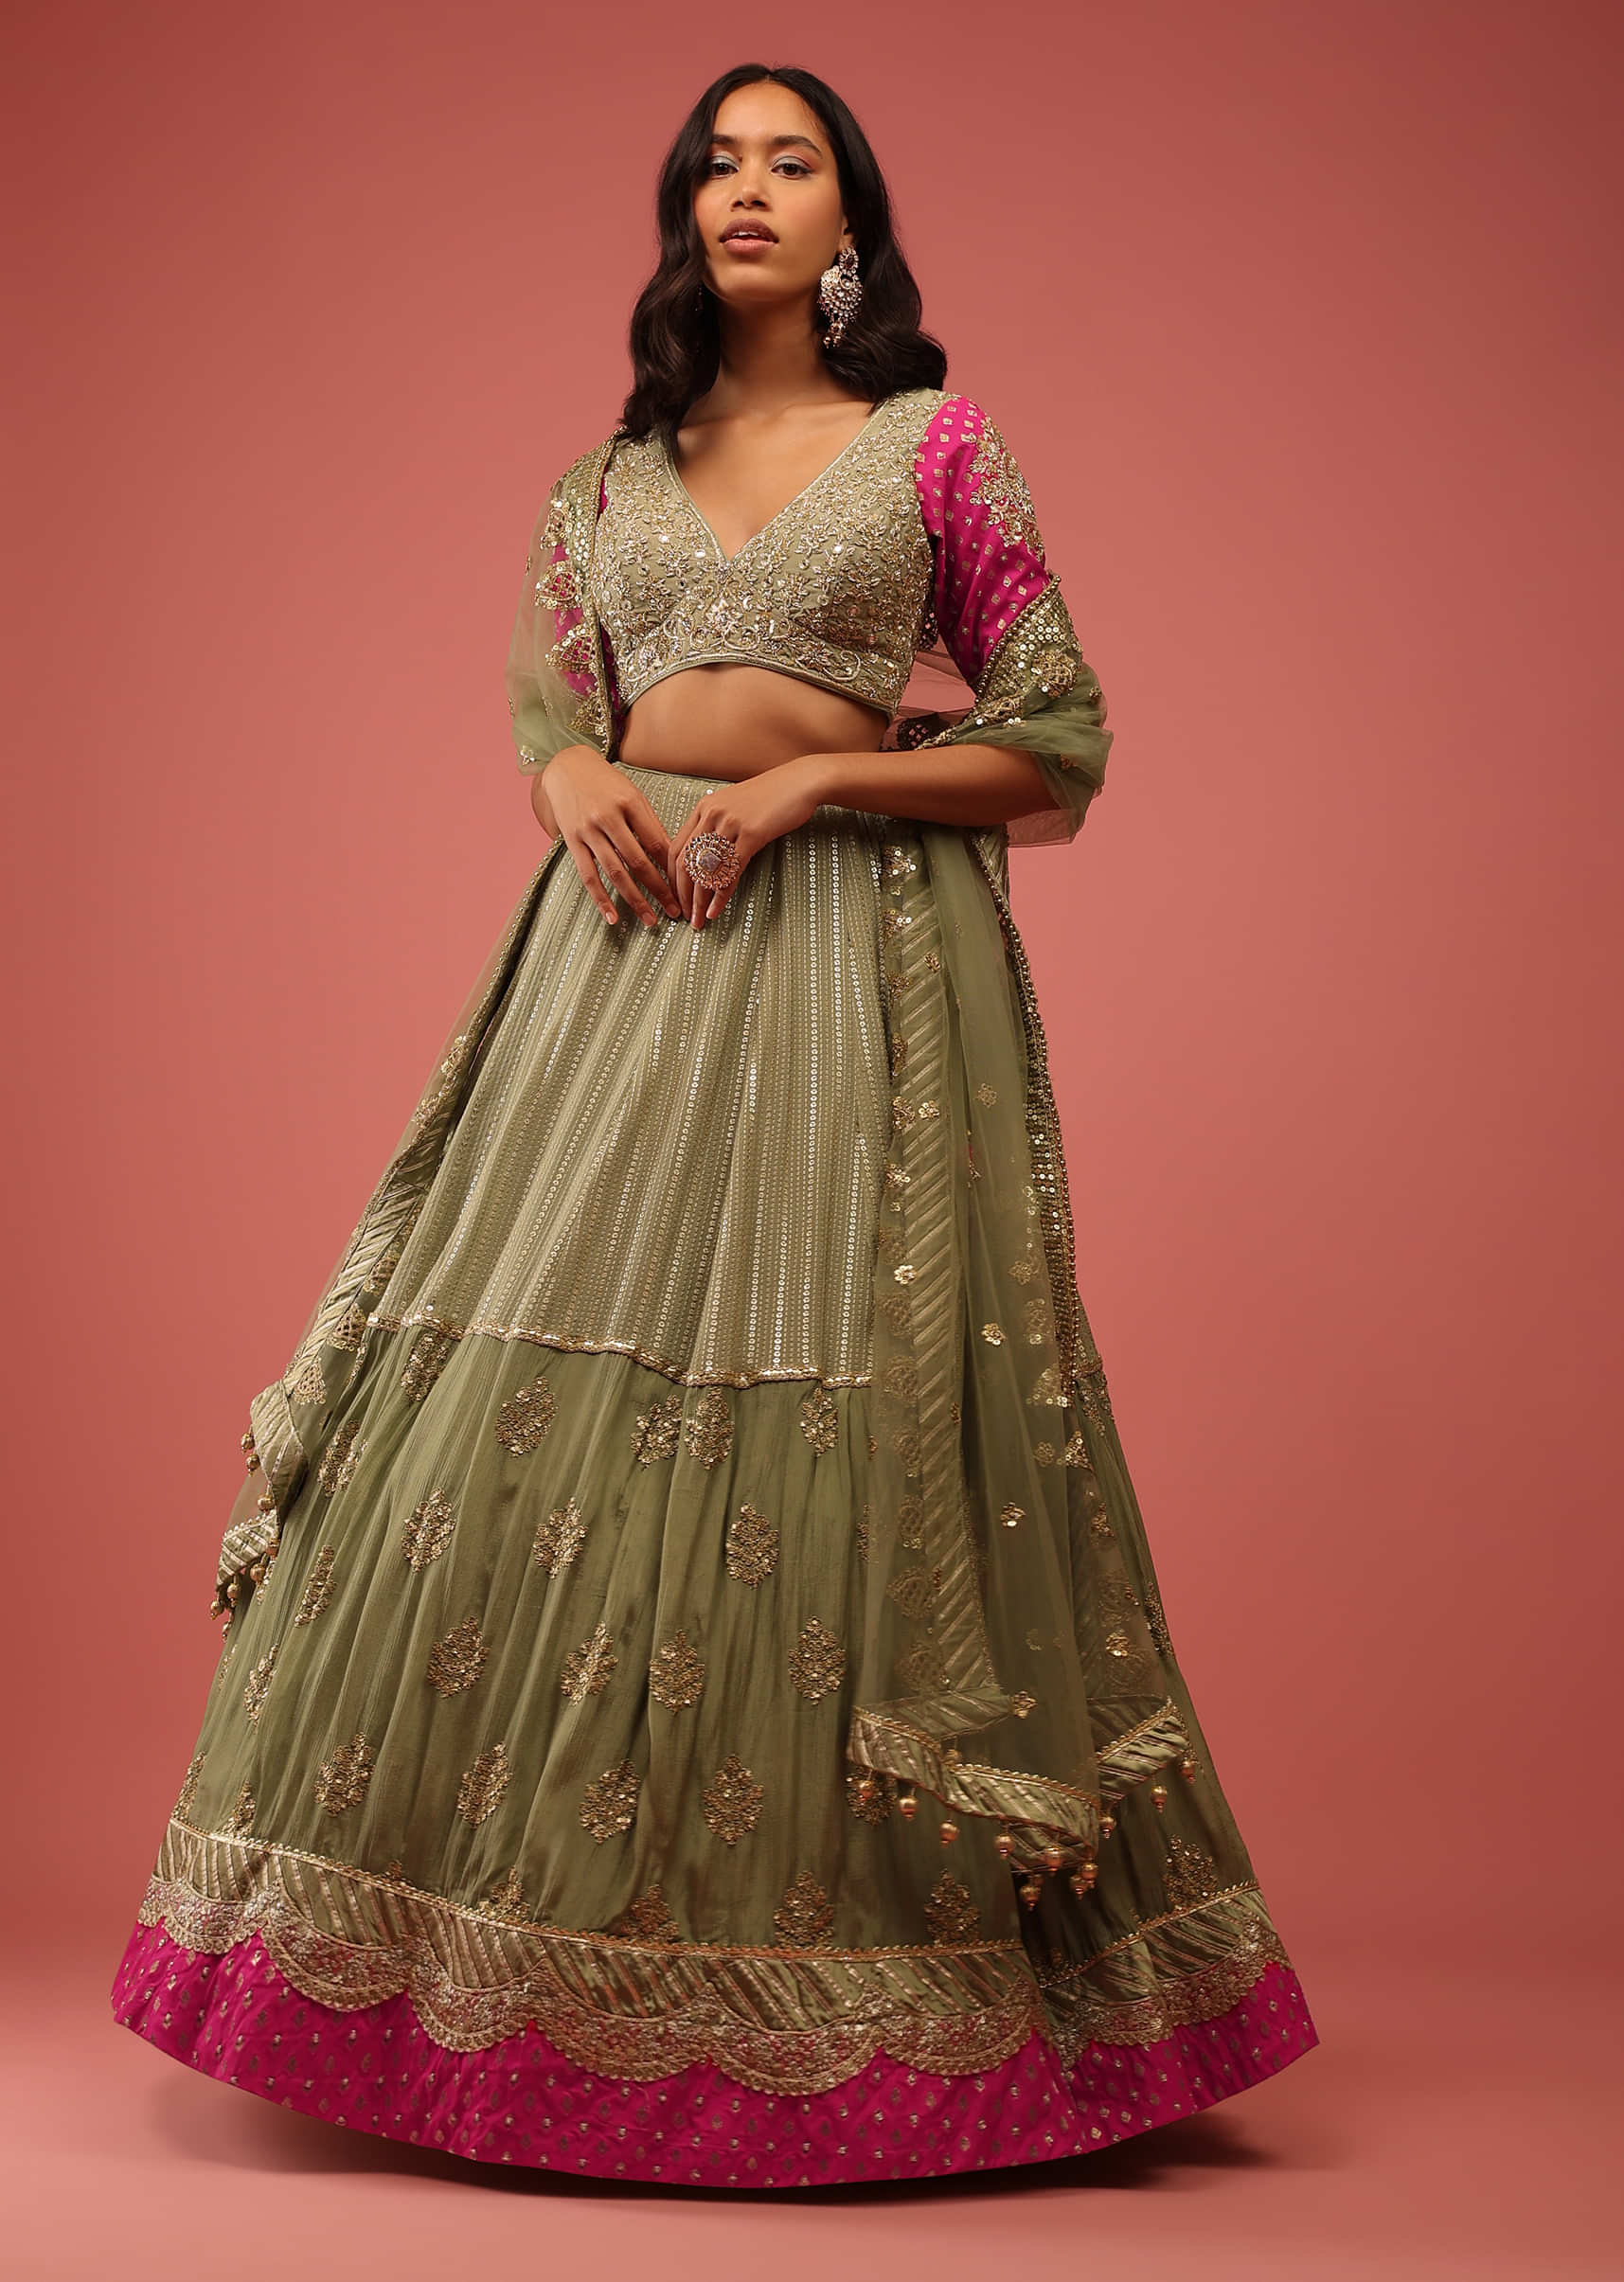 Sage Green Lehenga Choli With Sequins Embroidery And Contrasting Magenta Border And Sleeve Detailing